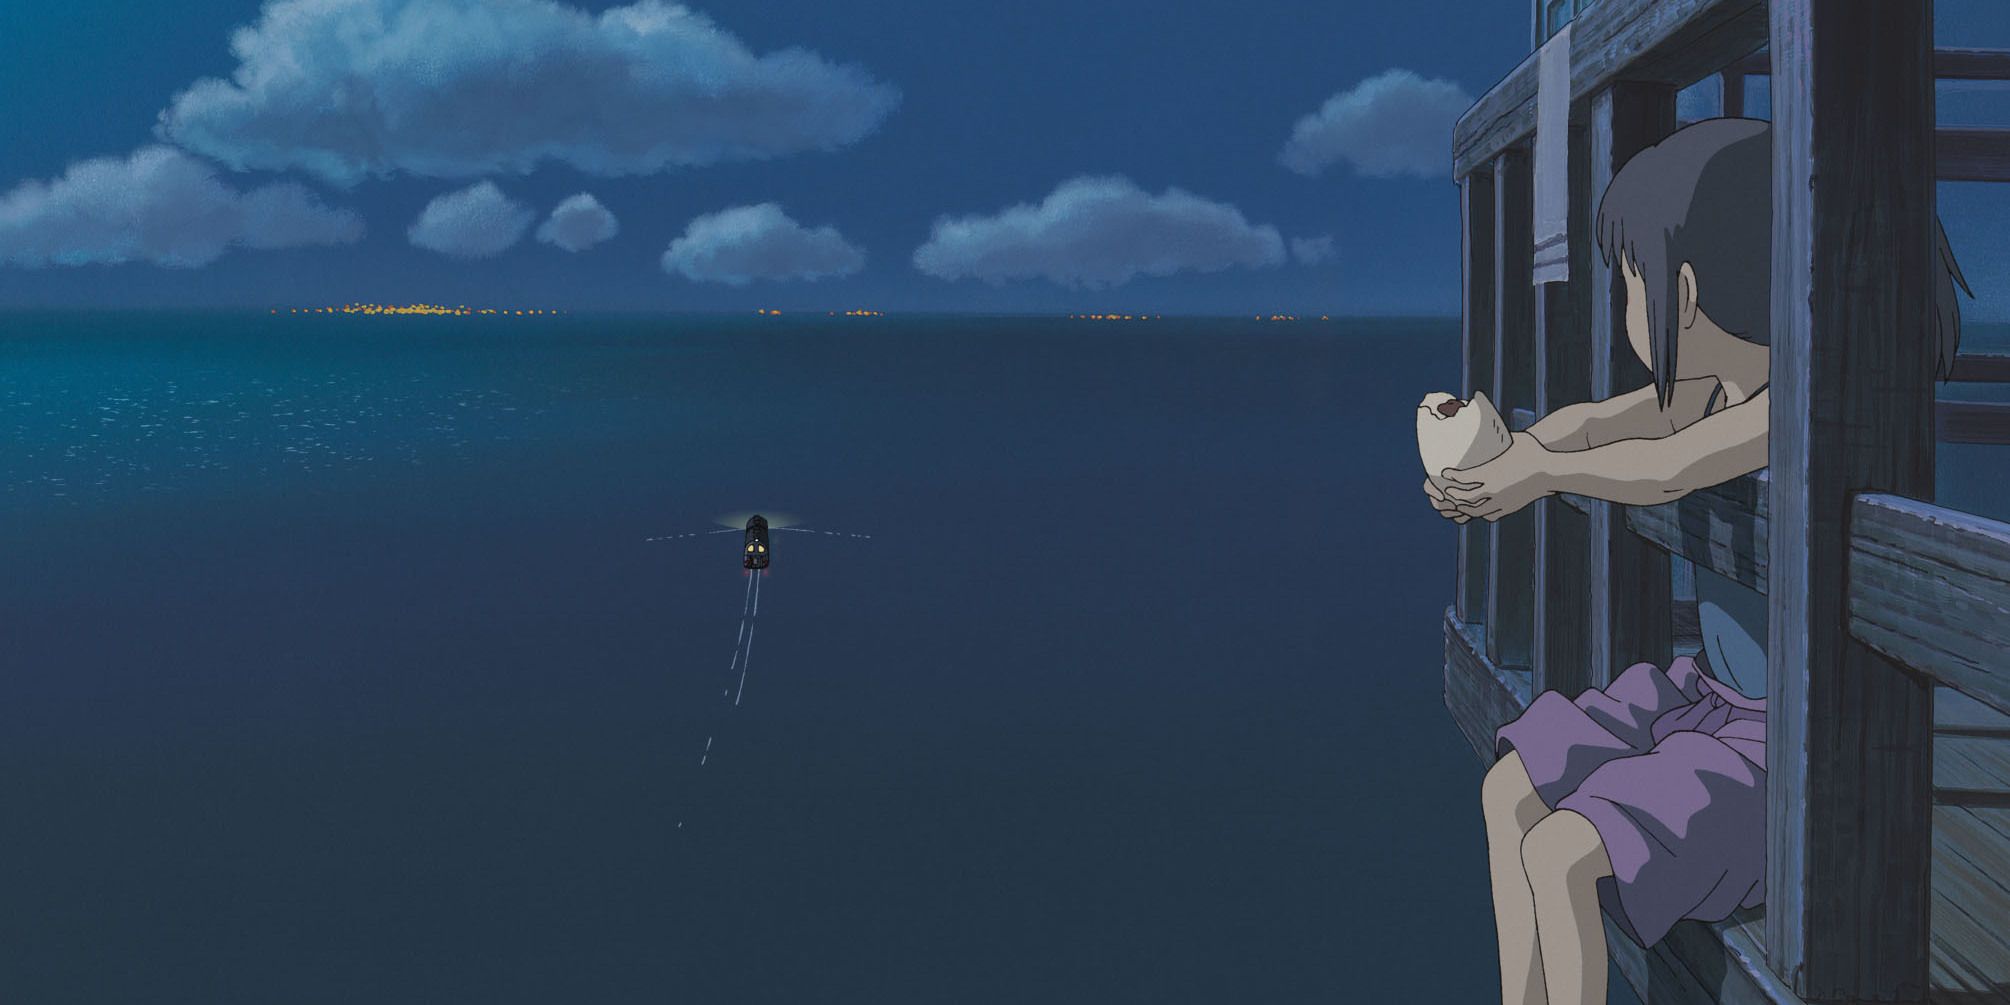 Sitting and watching boat in Spirited Away